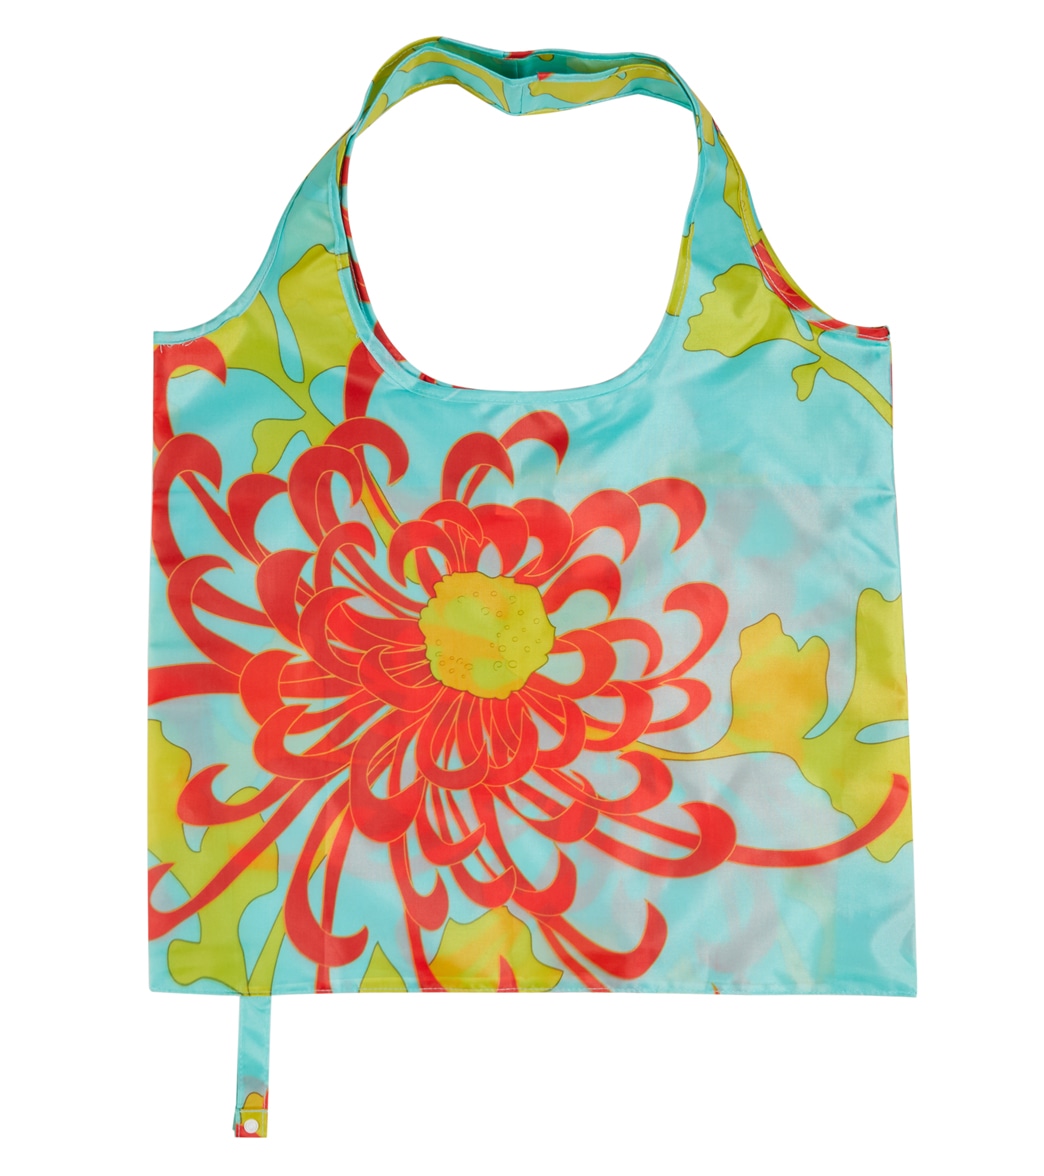 Envbags Chrysanthemum Water Resistant Tote Bag - Tourquise One Size Polyester - Swimoutlet.com